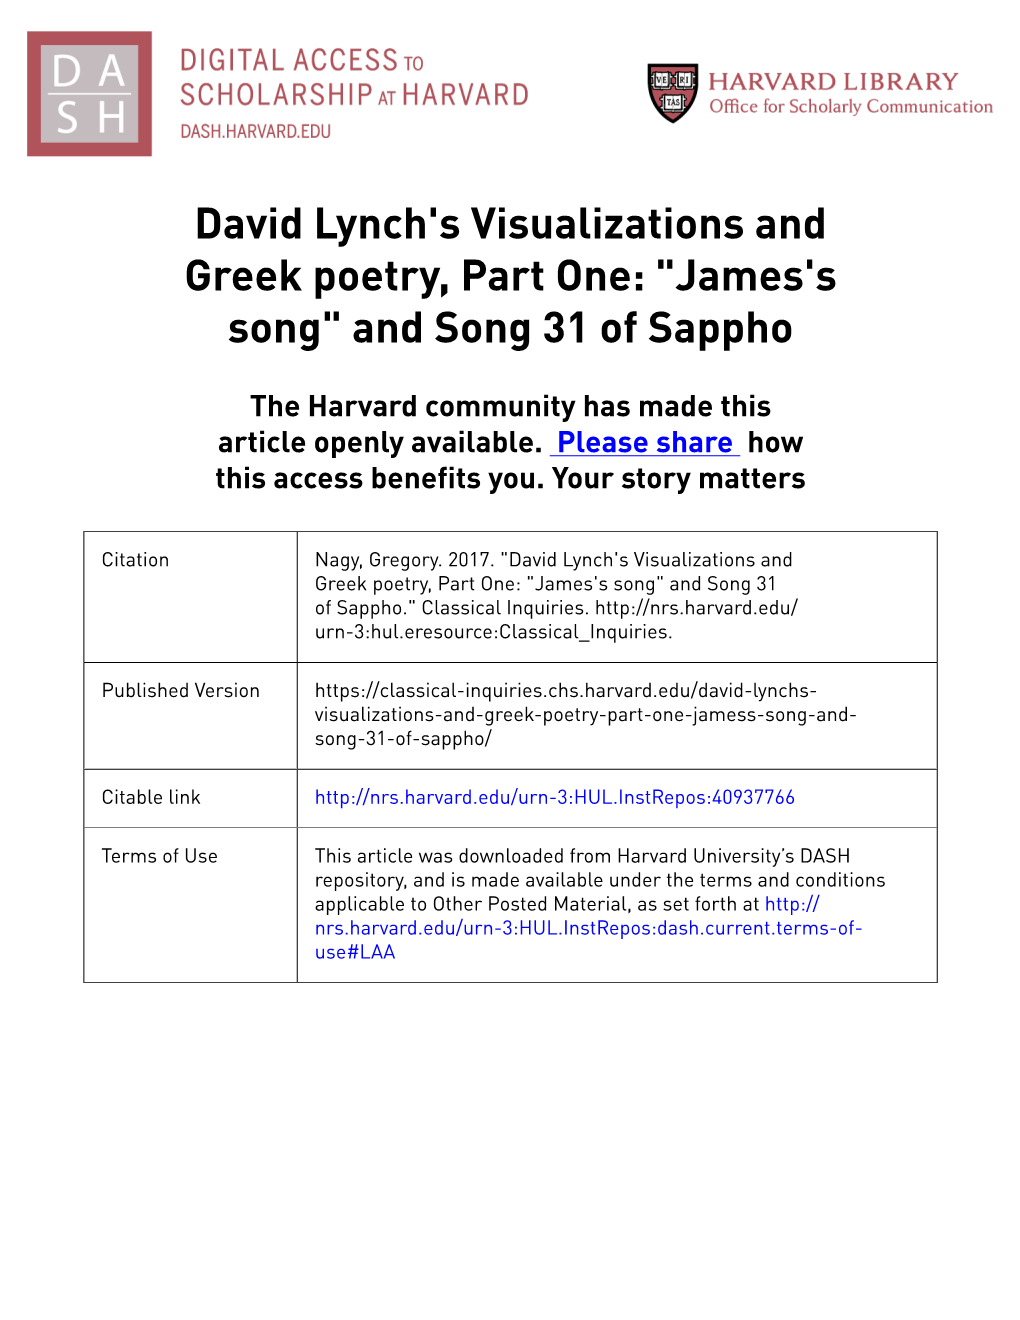 David Lynch's Visualizations and Greek Poetry, Part One: "James's Song" and Song 31 of Sappho